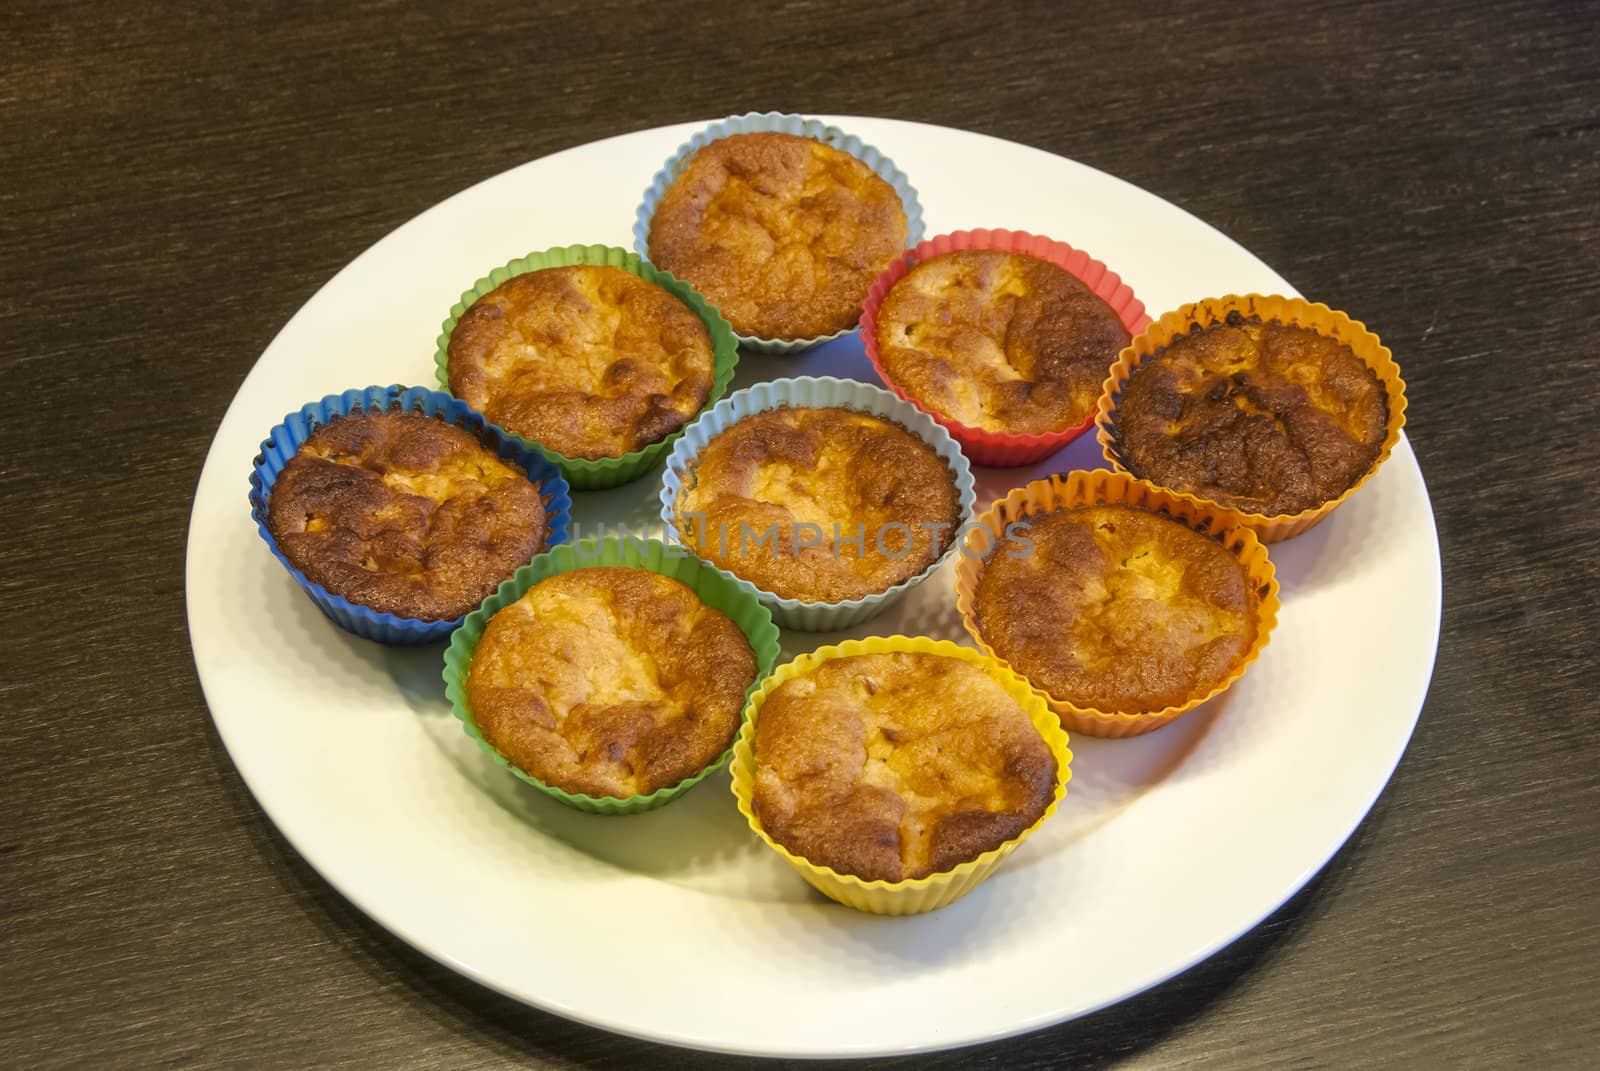 Homemade muffins on plate on brown table